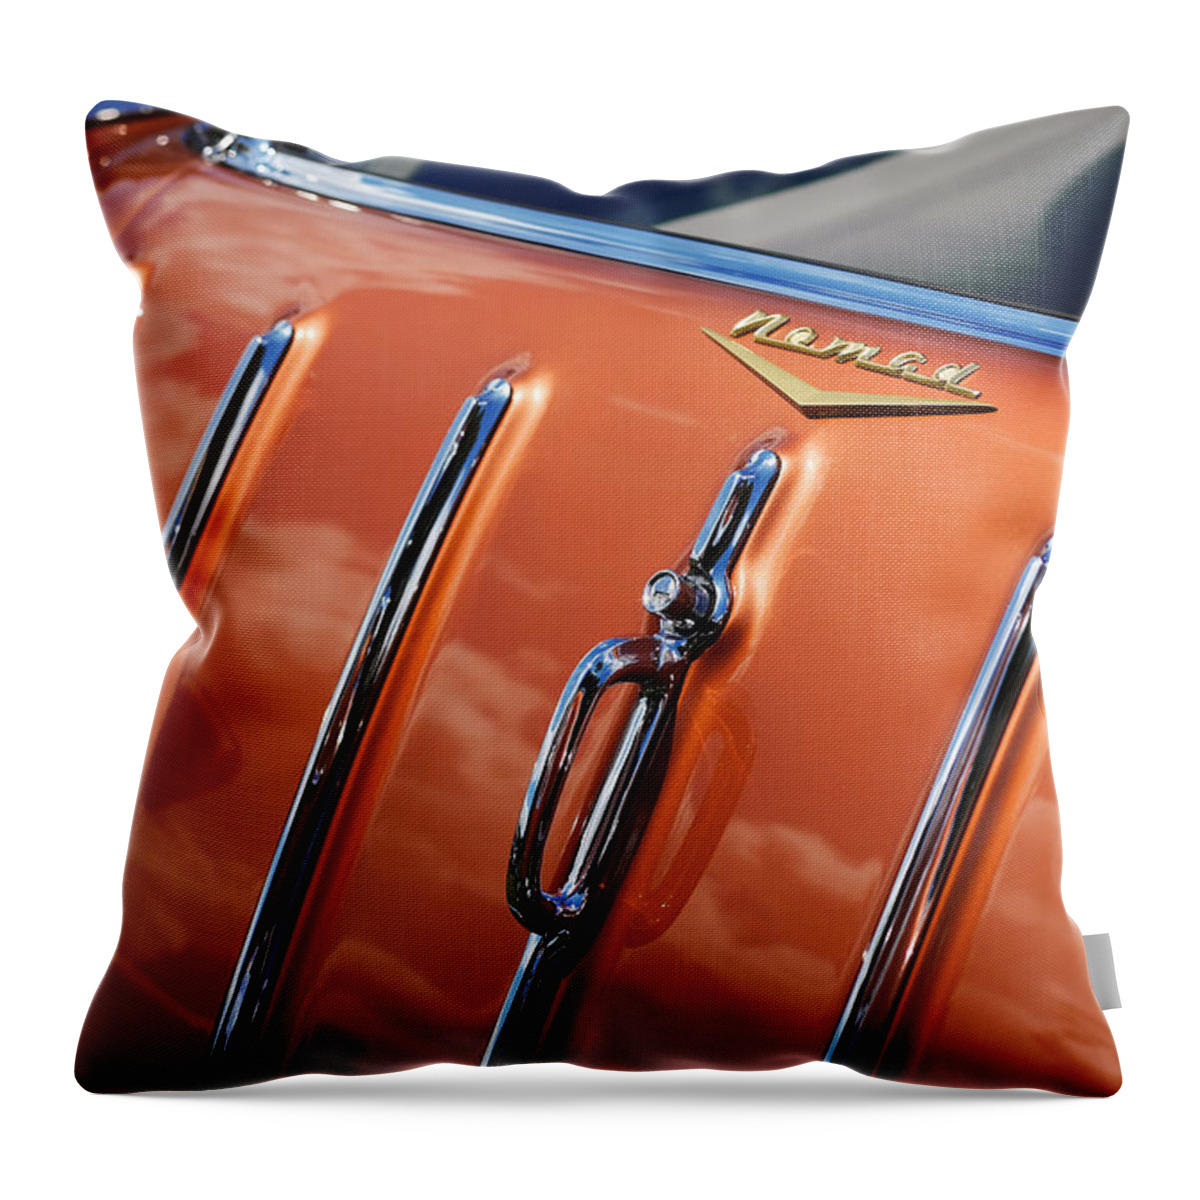 1957 Throw Pillow featuring the photograph 1957 Chevrolet Nomad by Gordon Dean II